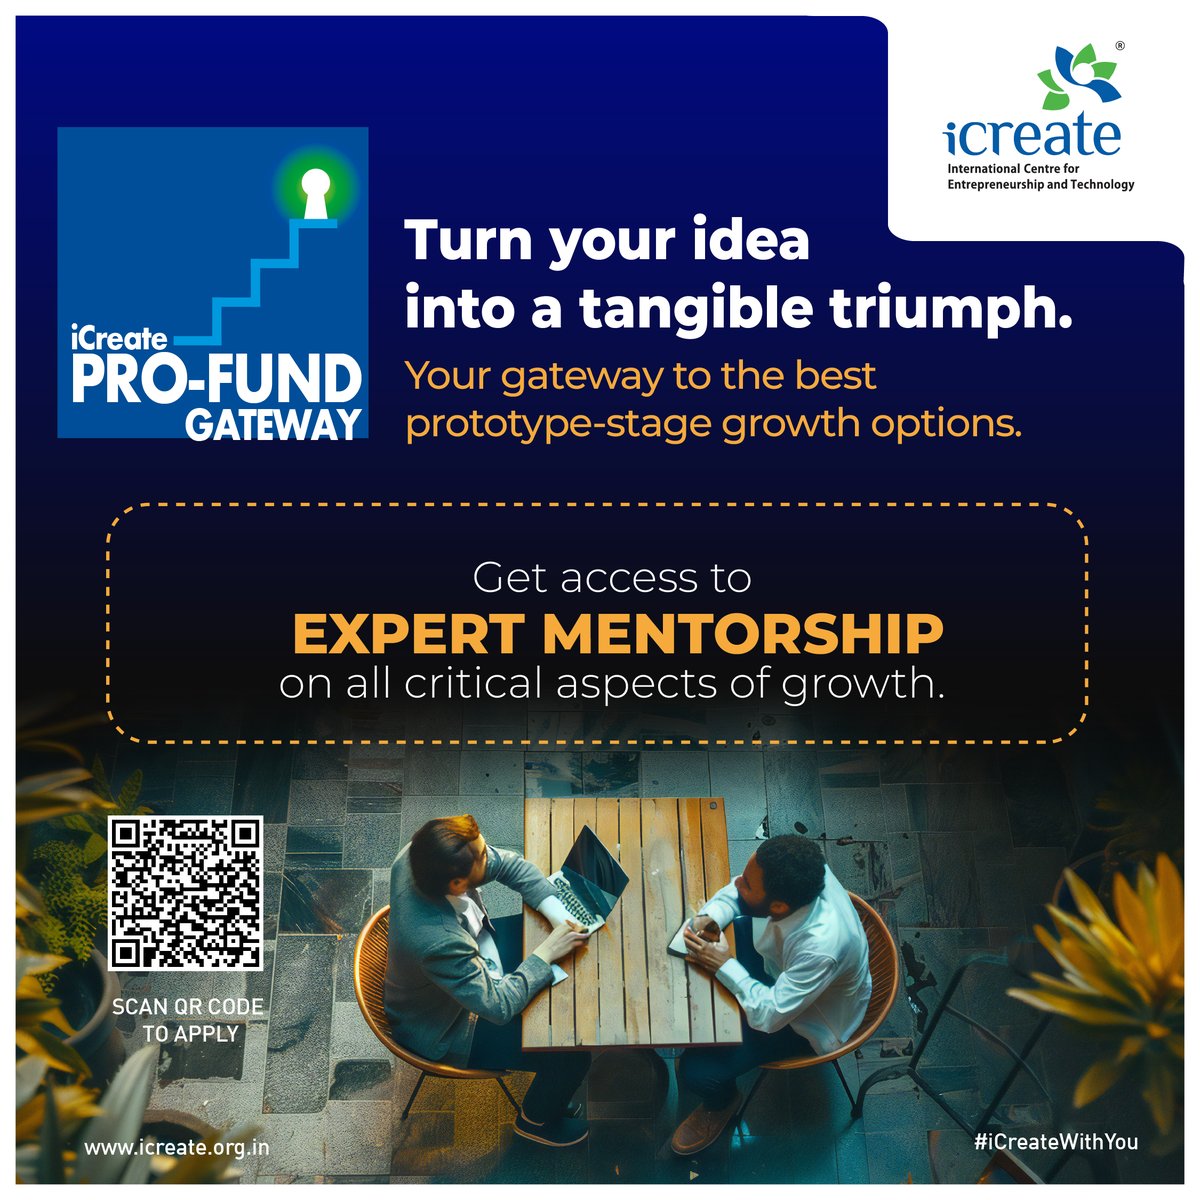 Ready to turn your idea into a game-changing product? With iCreate Pro-Fund Gateway, get the support you need to thrive.  Apply now: icreate.acceleratorapp.co/application/ne…

#iCreateWithYou #ProFund #fundingopportunity #startups #innovation